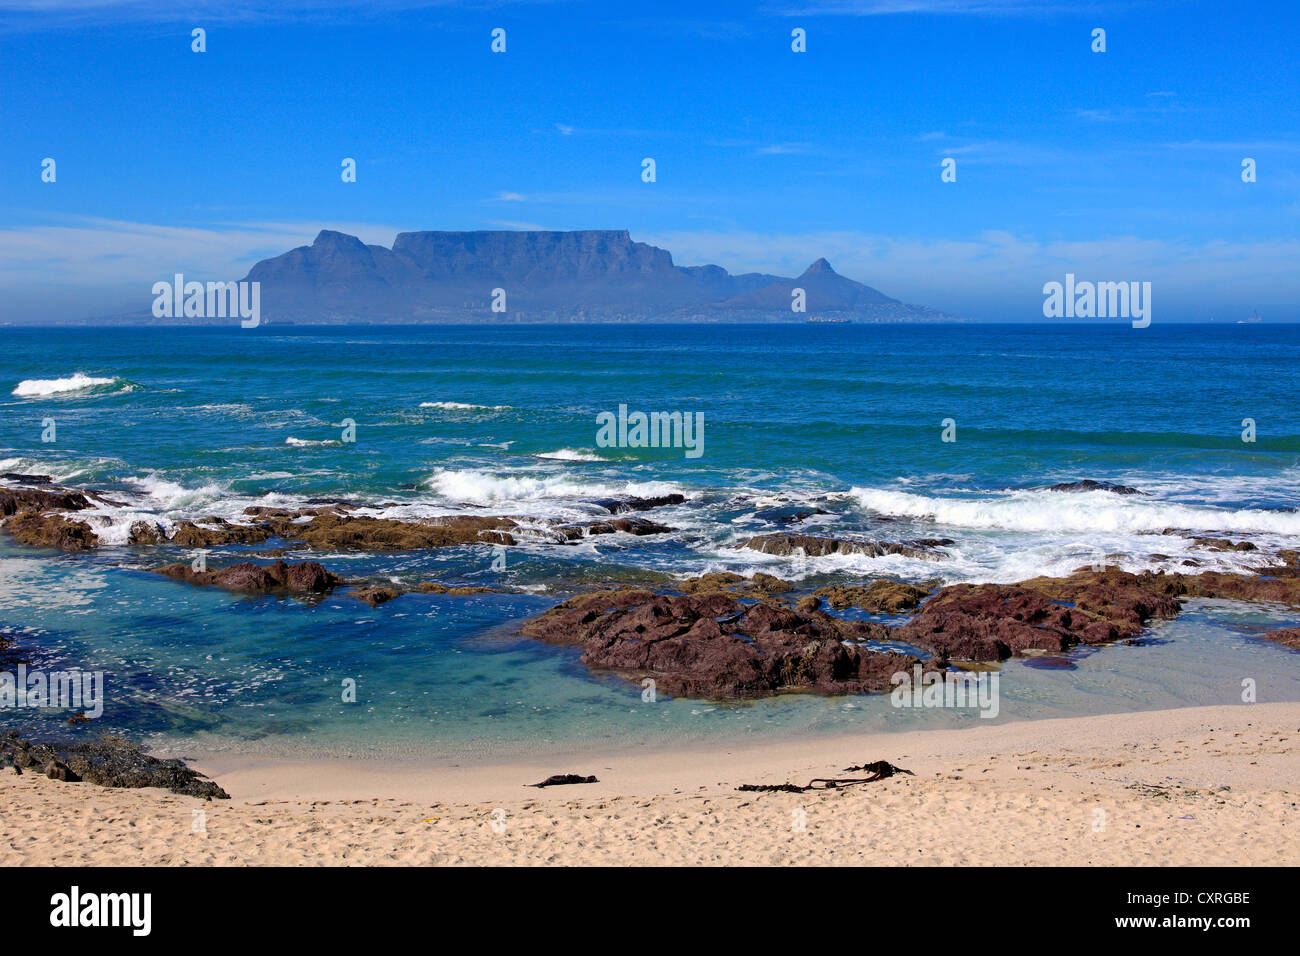 Bloubergstrand beach, Table Mountain at back, Cape Town, South Africa, Africa Stock Photo